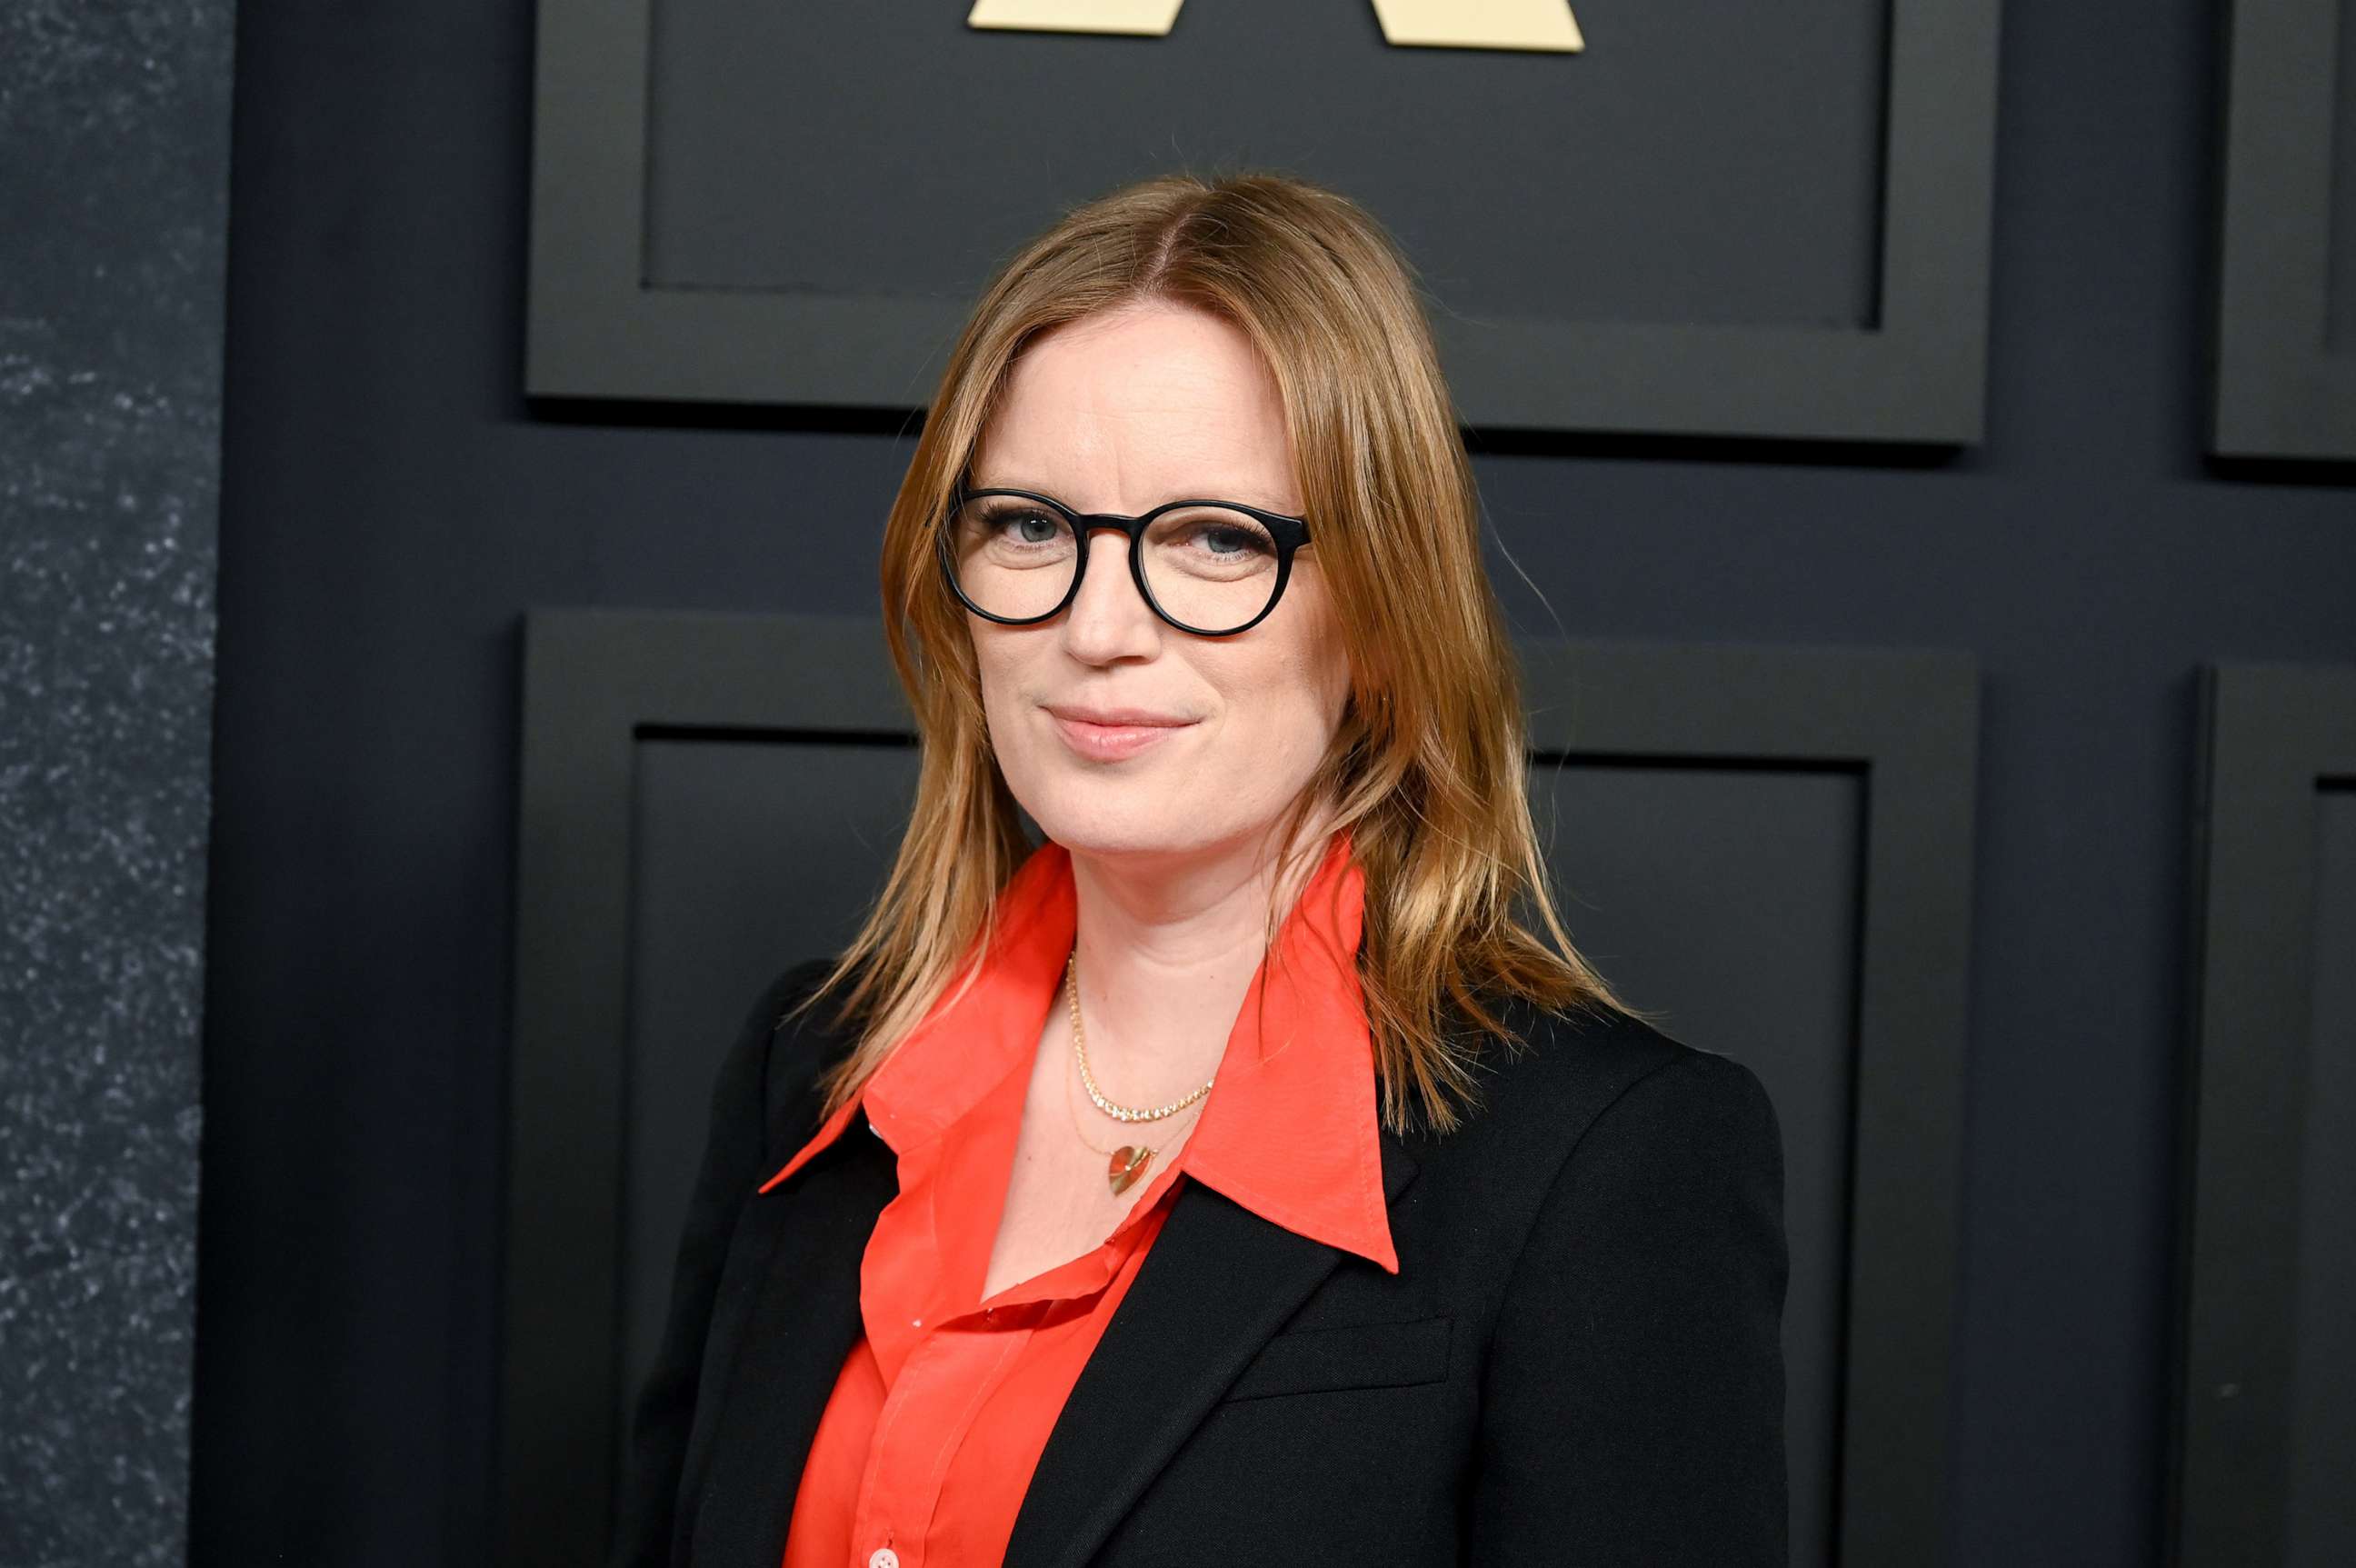 PHOTO: Sarah Polley at the 95th Oscar Nominees Luncheon held at The Beverly Hilton on Feb. 13, 2023 in Beverly Hills, Calif.